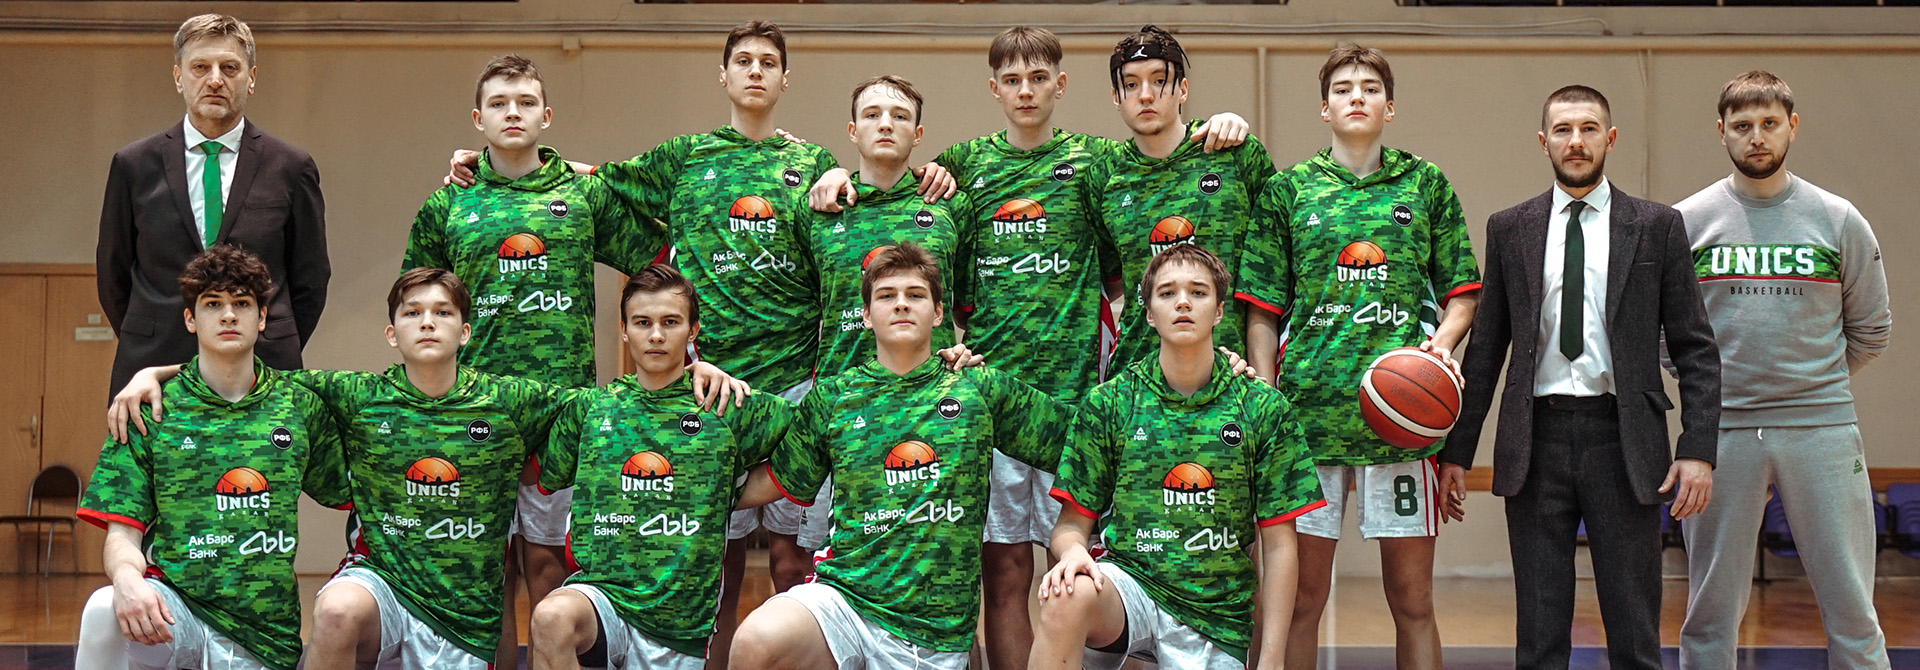 UNICS-Junior: 5 out of 5 in the first round of the Semifinal round!